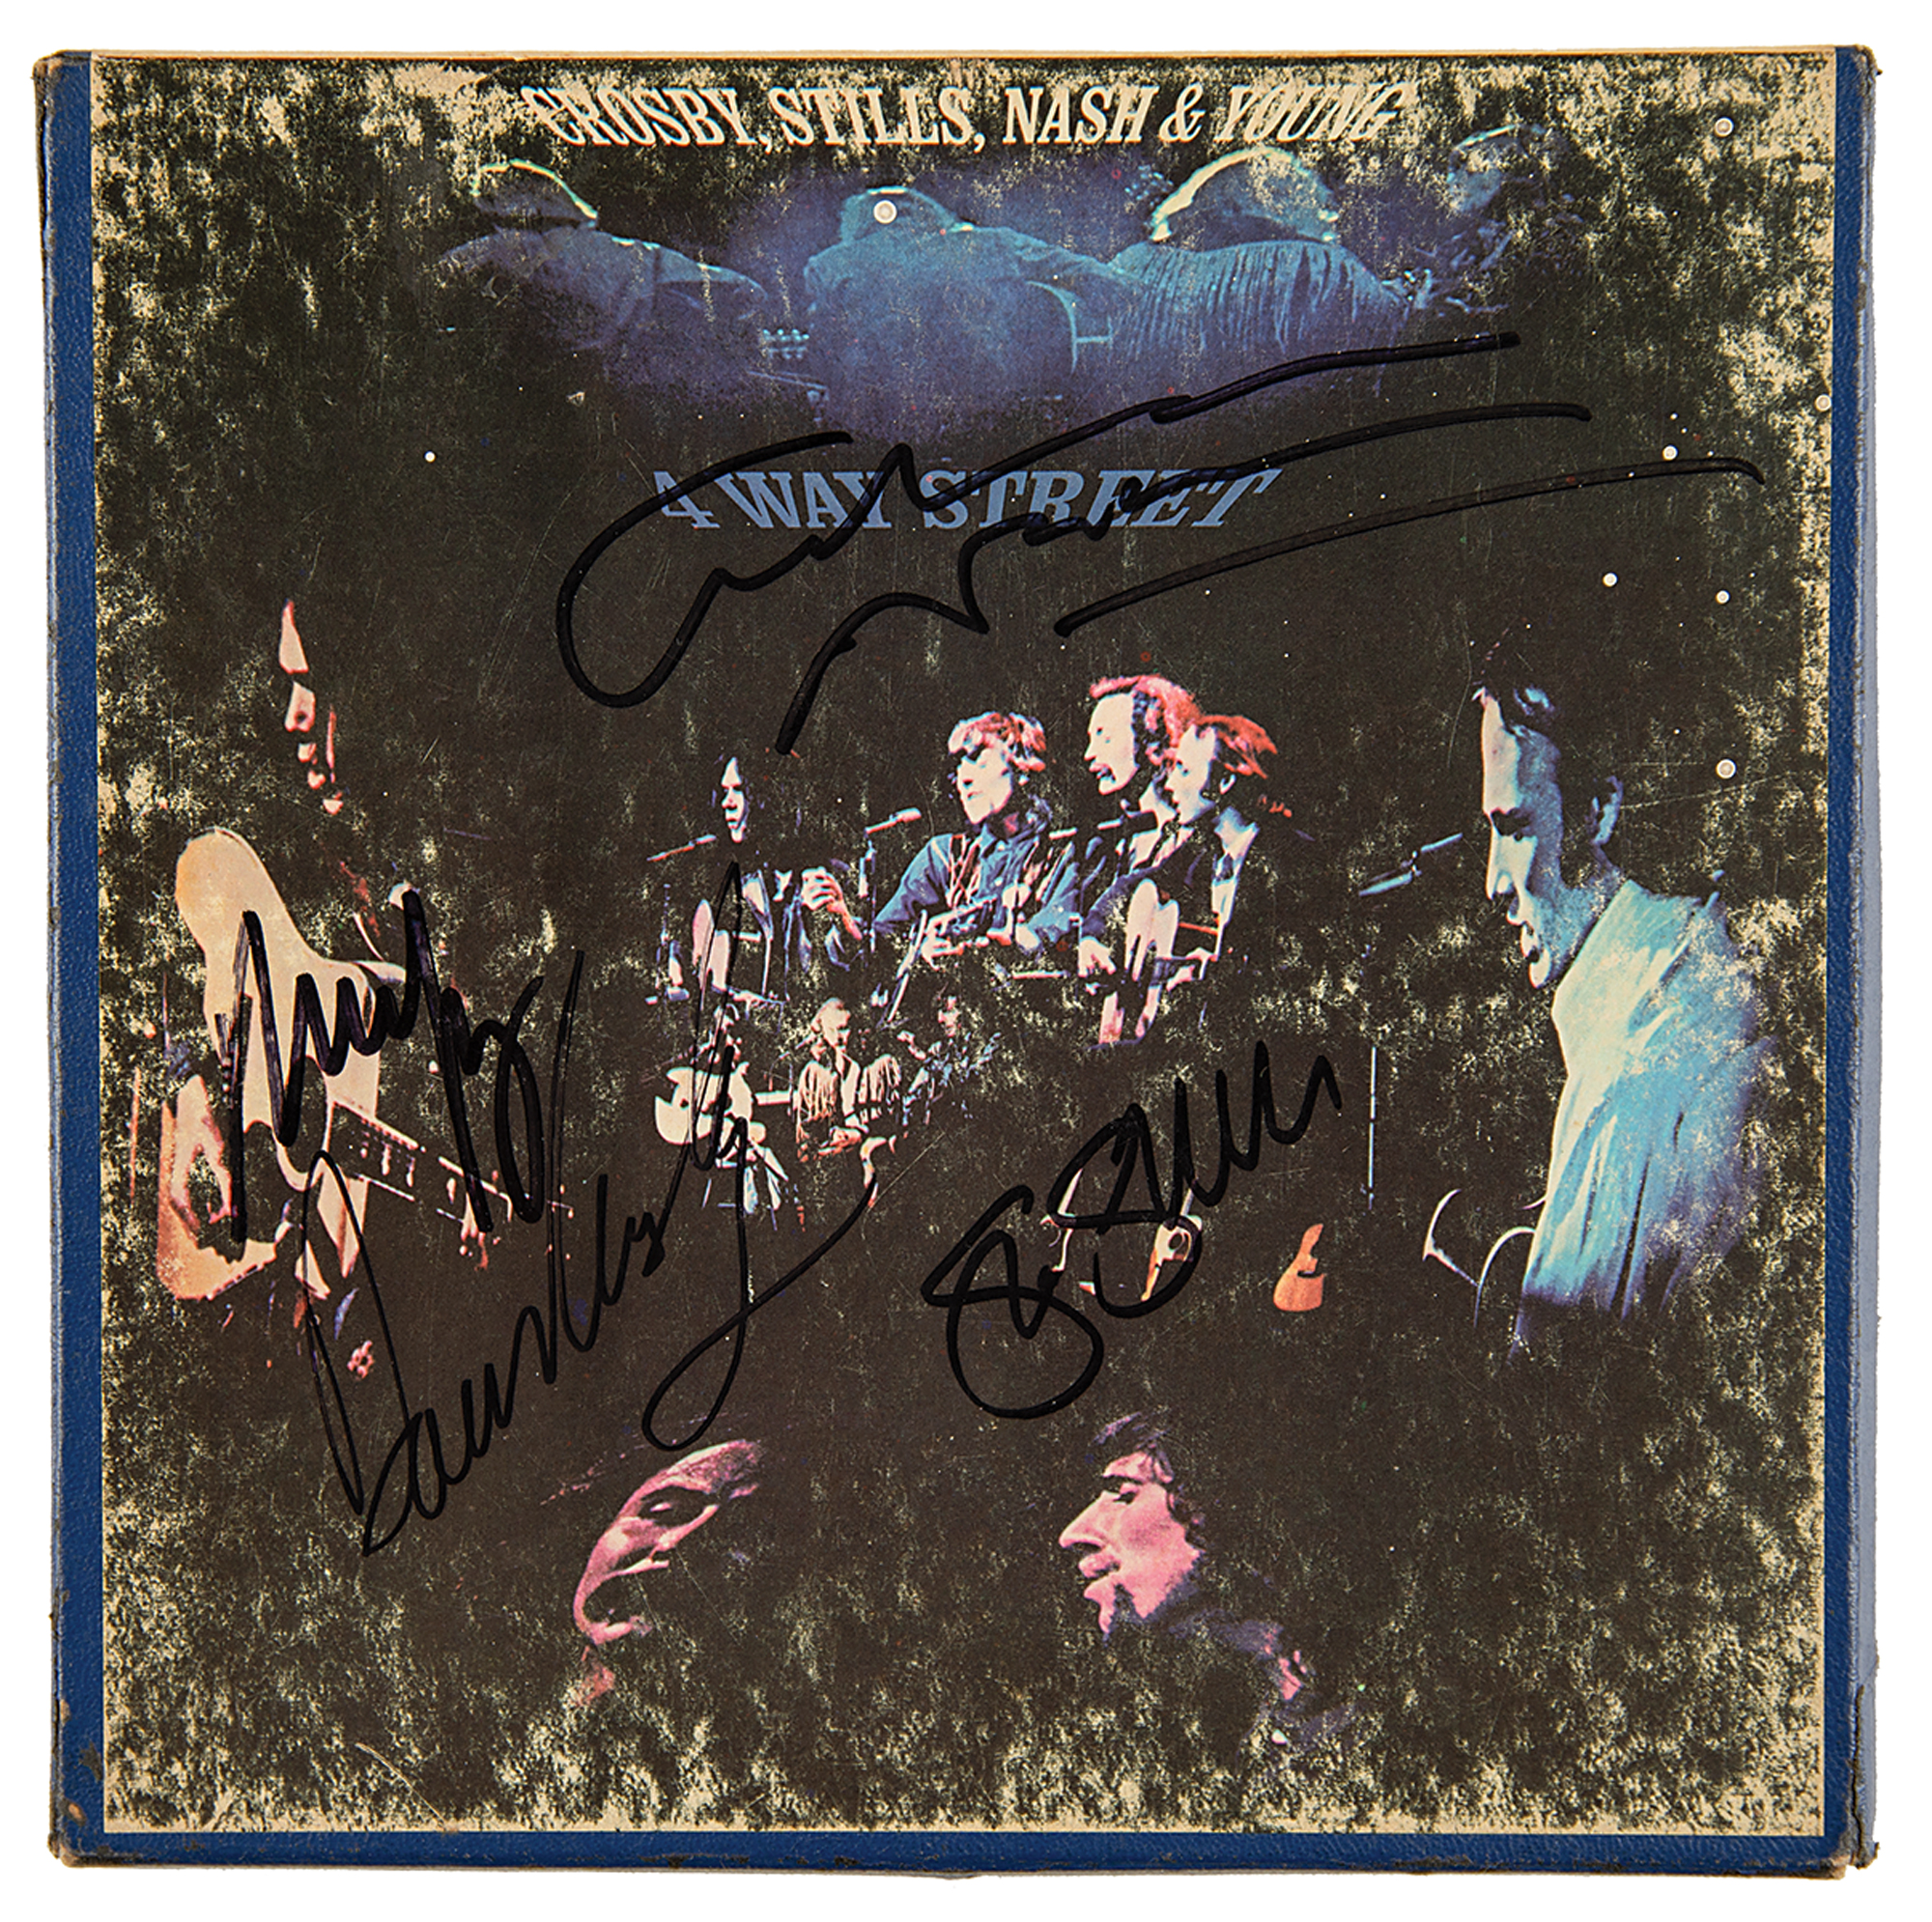 Crosby, Stills, Nash & Young Signed Reel-to-Reel Tape - 4 Way